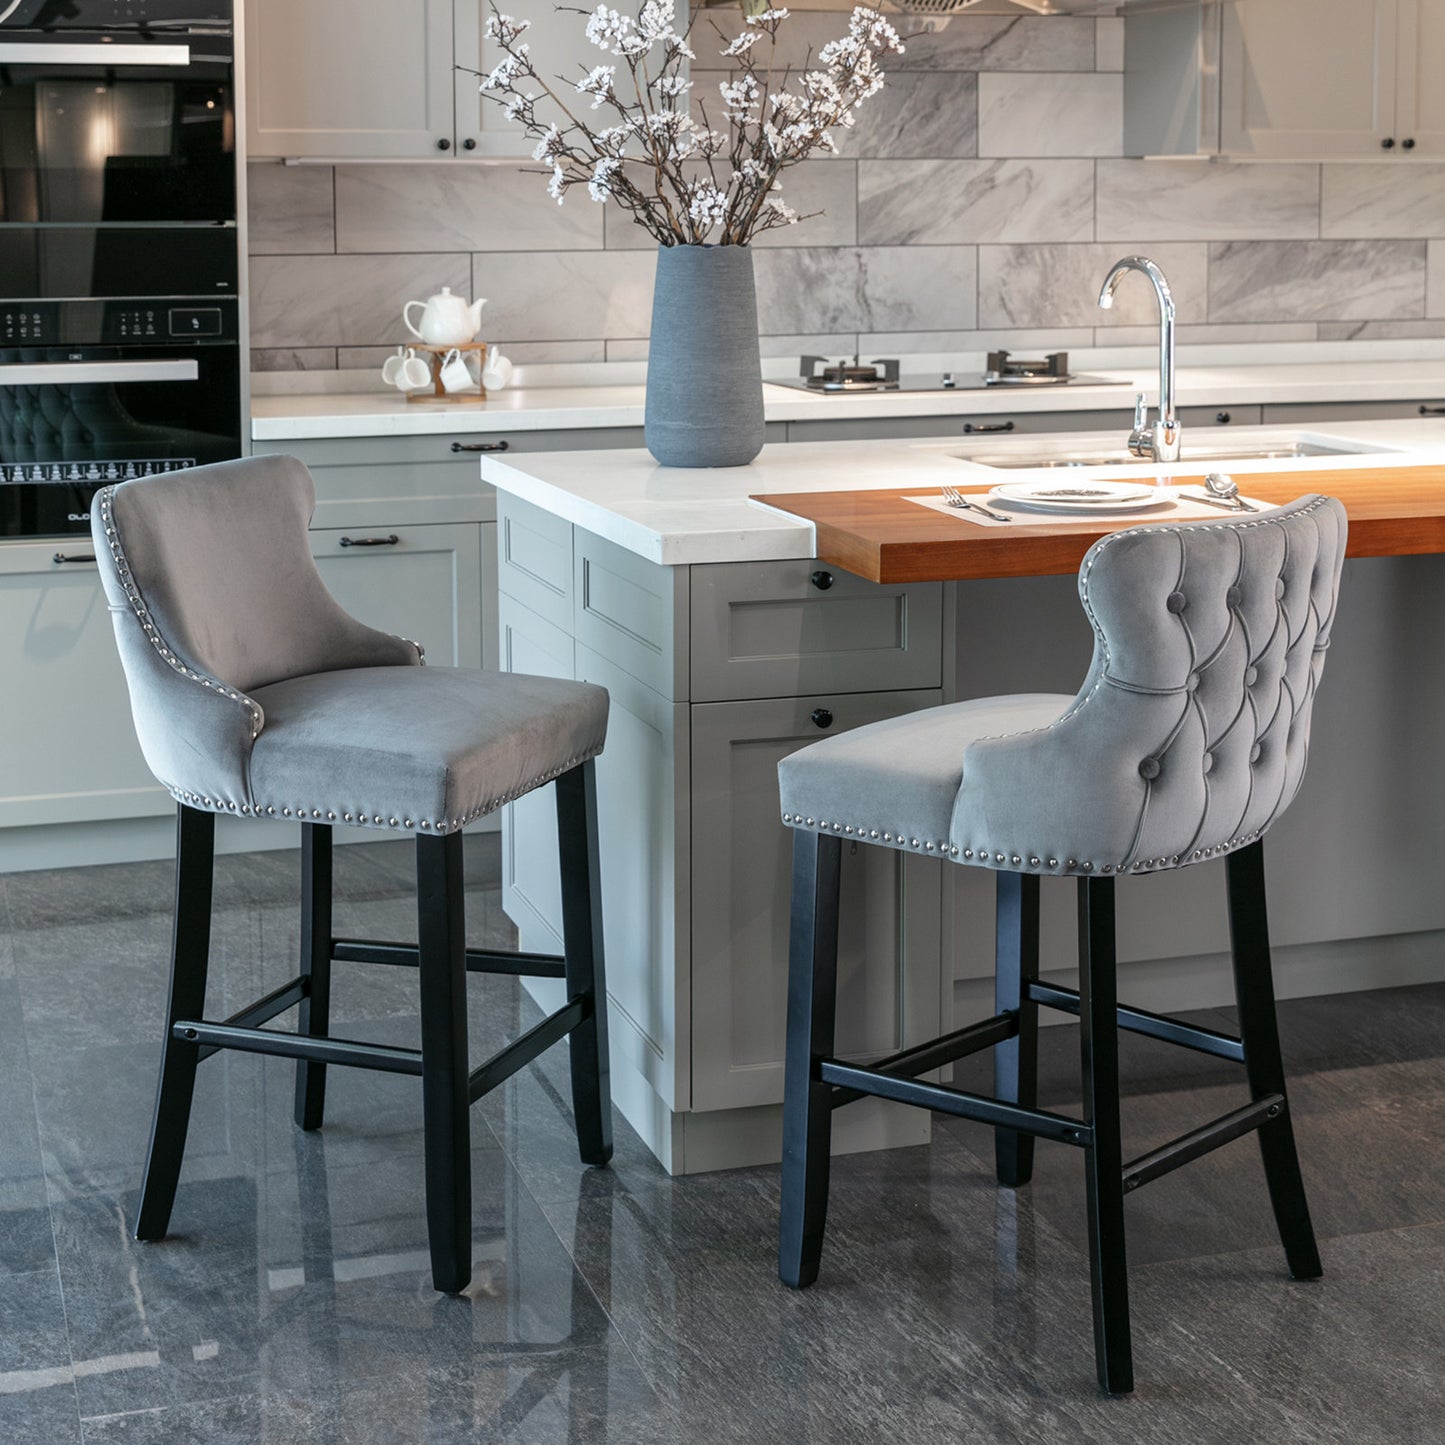 Contemporary Velvet Upholstered Wing-Back Barstools with Button Tufted Decoration and Wooden Legs, and Chrome Nailhead Trim, Leisure Style Bar Chairs,Bar stools, Set of 4 (Gray), SW1824GY x 2 cartons